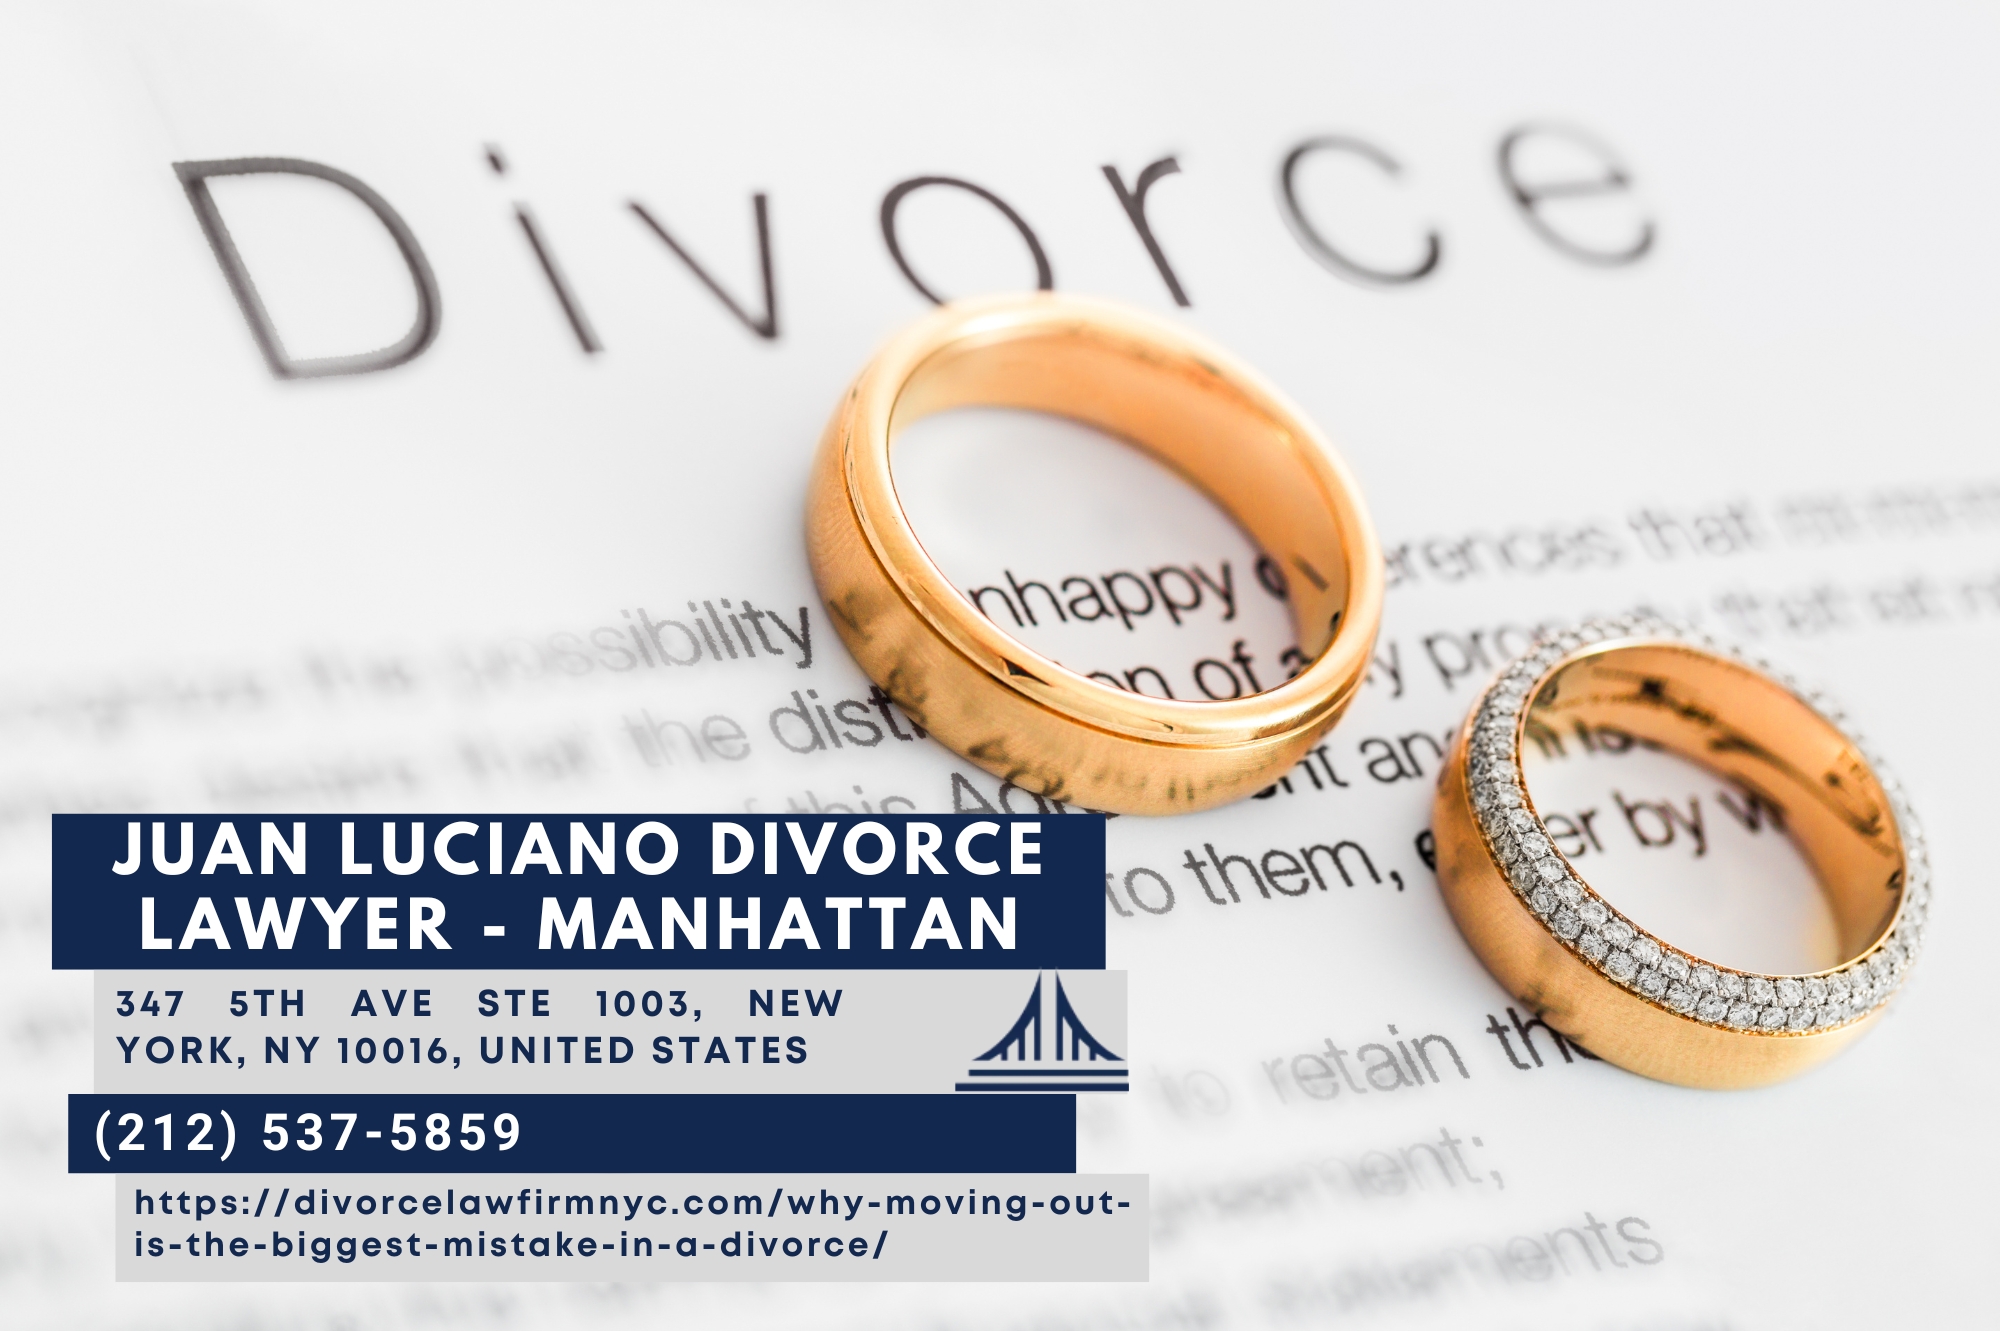 New York City Divorce Lawyer Juan Luciano Highlights the Pitfalls of Moving Out During Divorce Proceedings